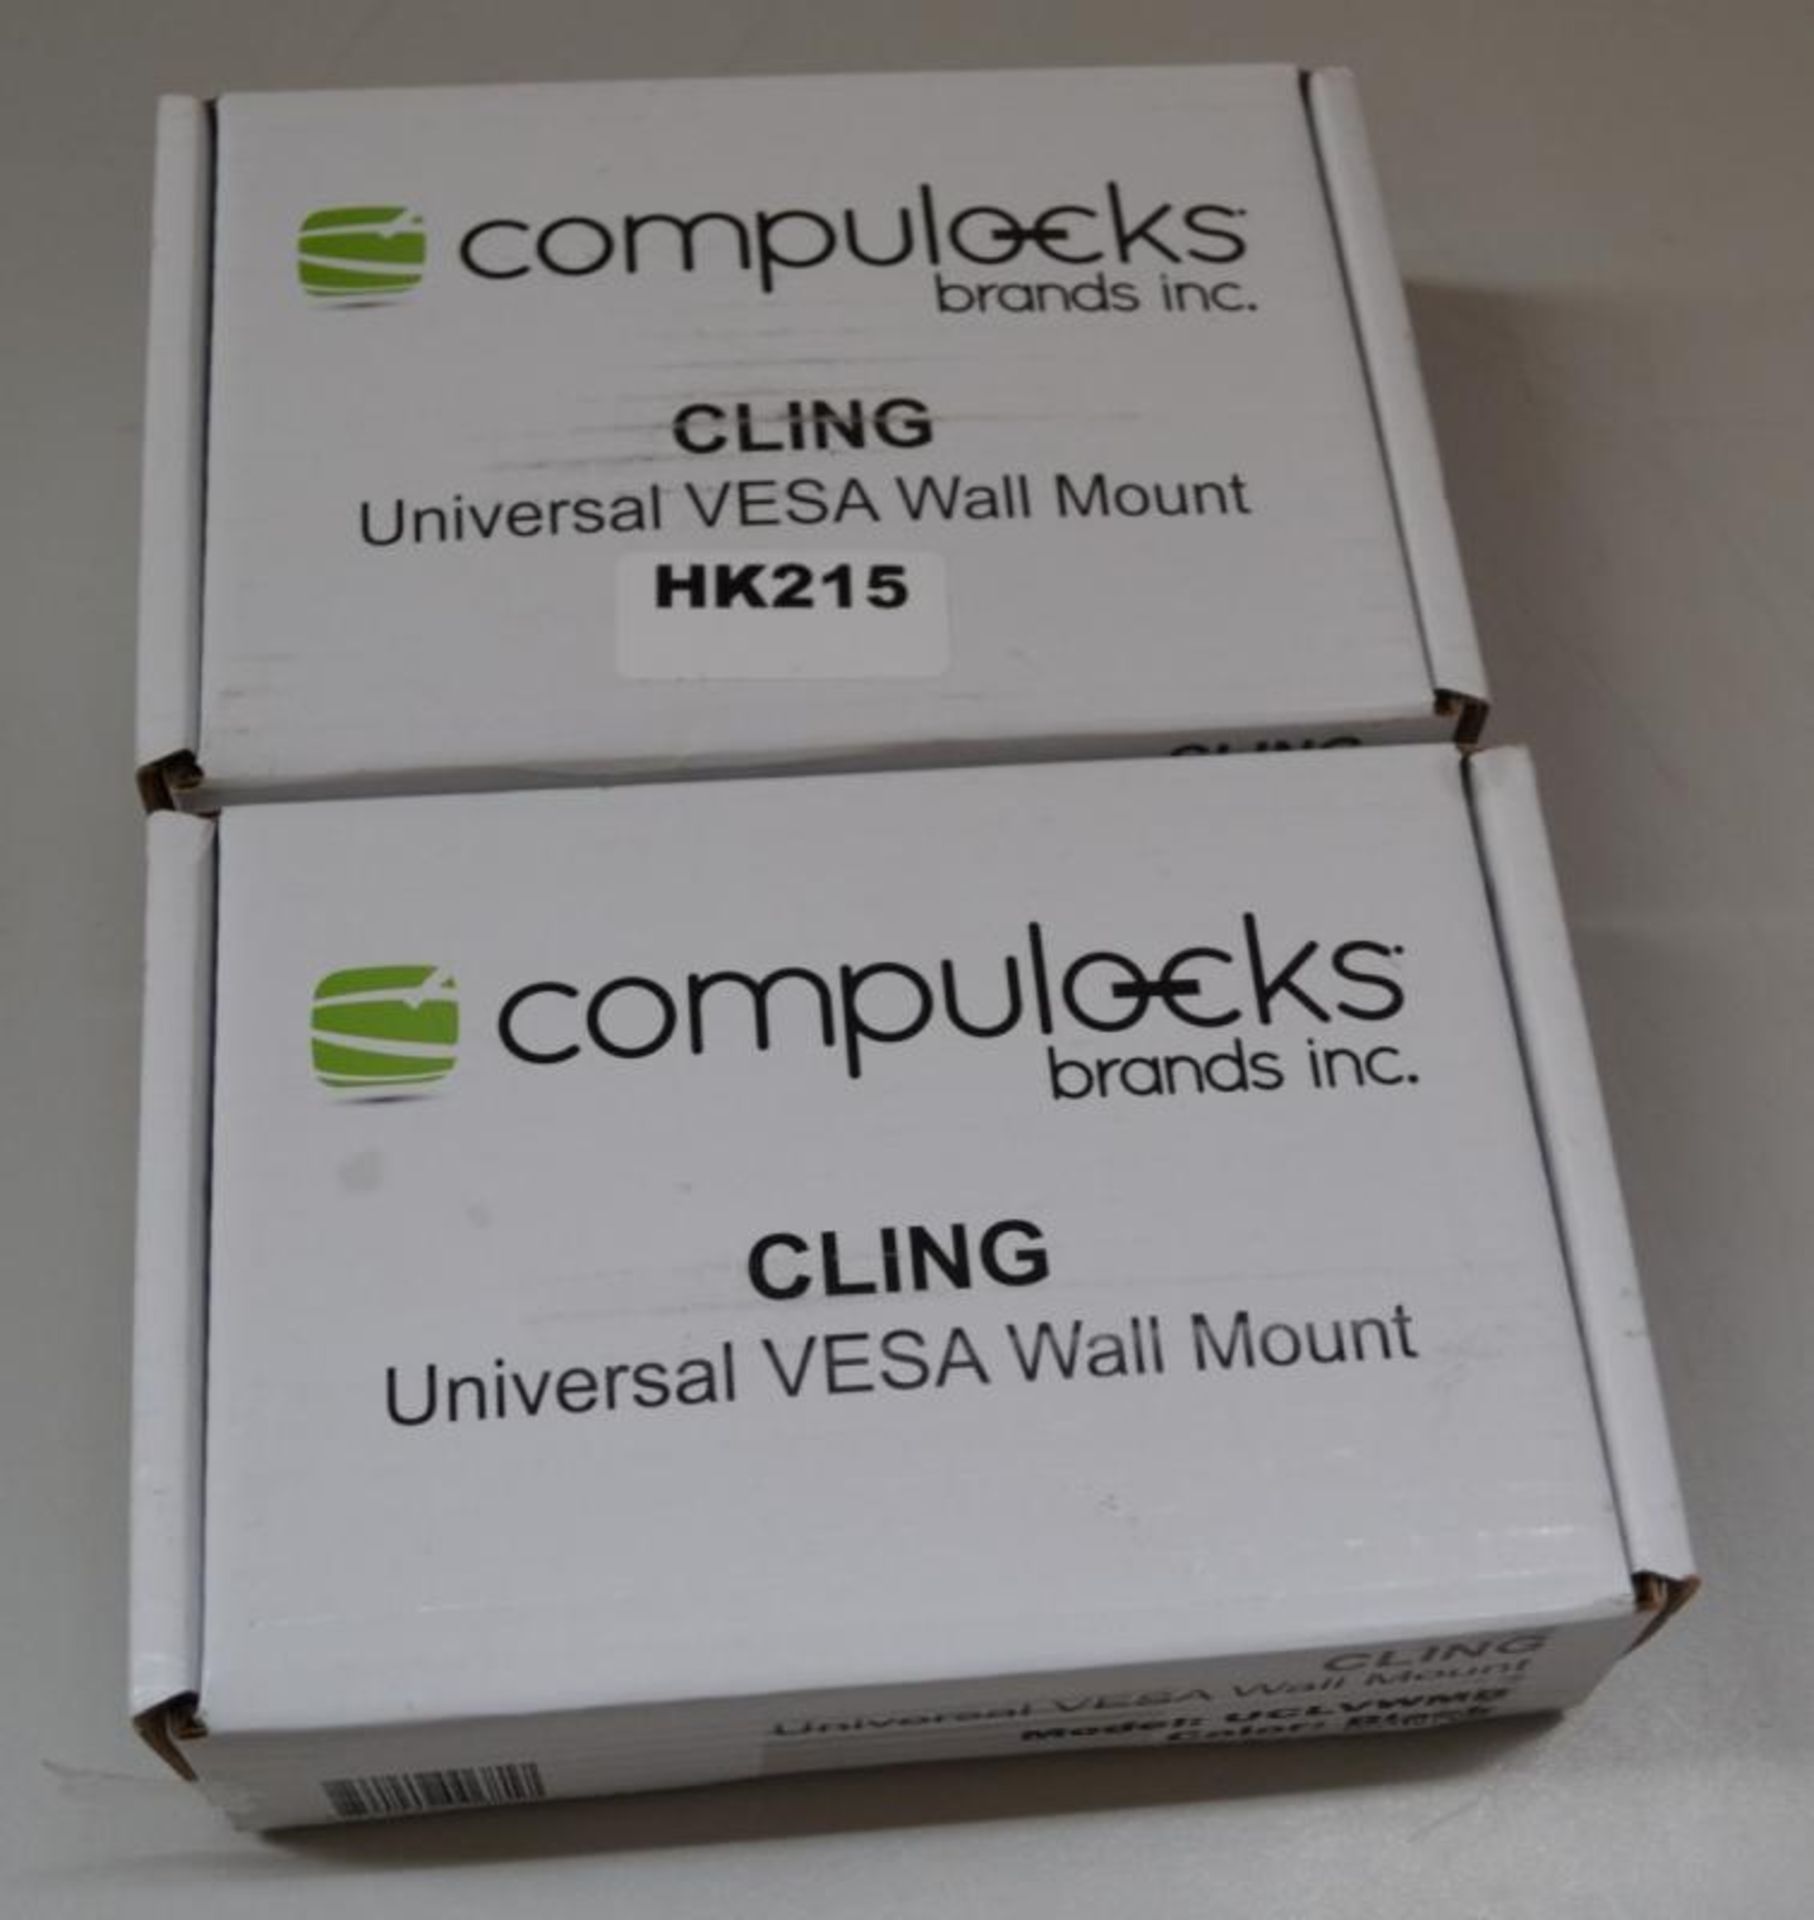 2 x Maclocks UCLGVWMB Cling Universal Security Wall Mount 13" Screen Support New In Box - Ref HK215 - Image 2 of 3